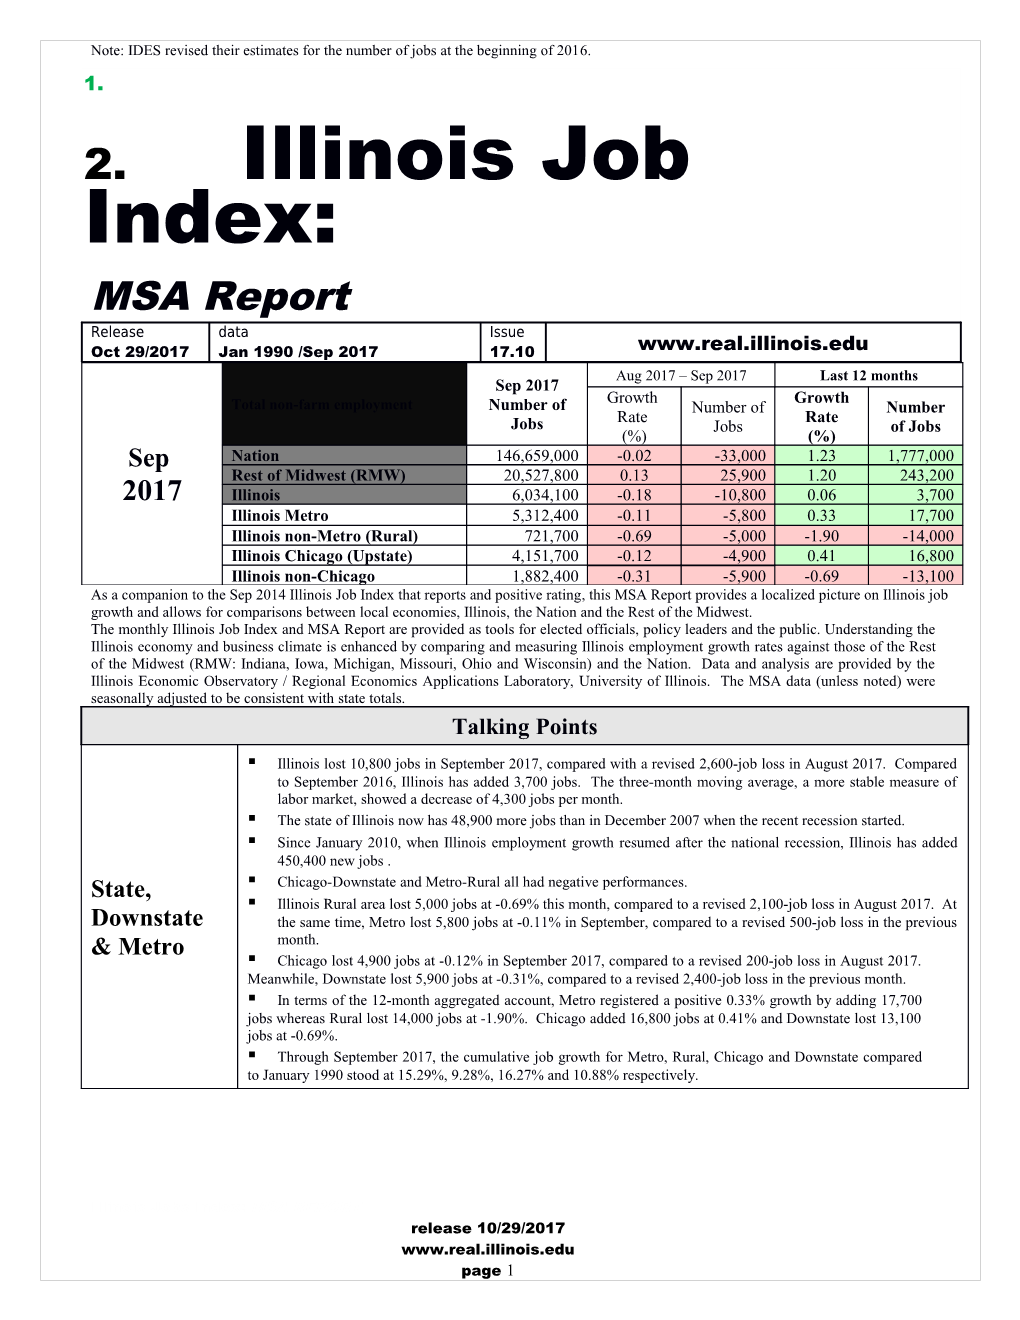 Note: IDES Revised Their Estimates for the Number of Jobs at the Beginning of 2016